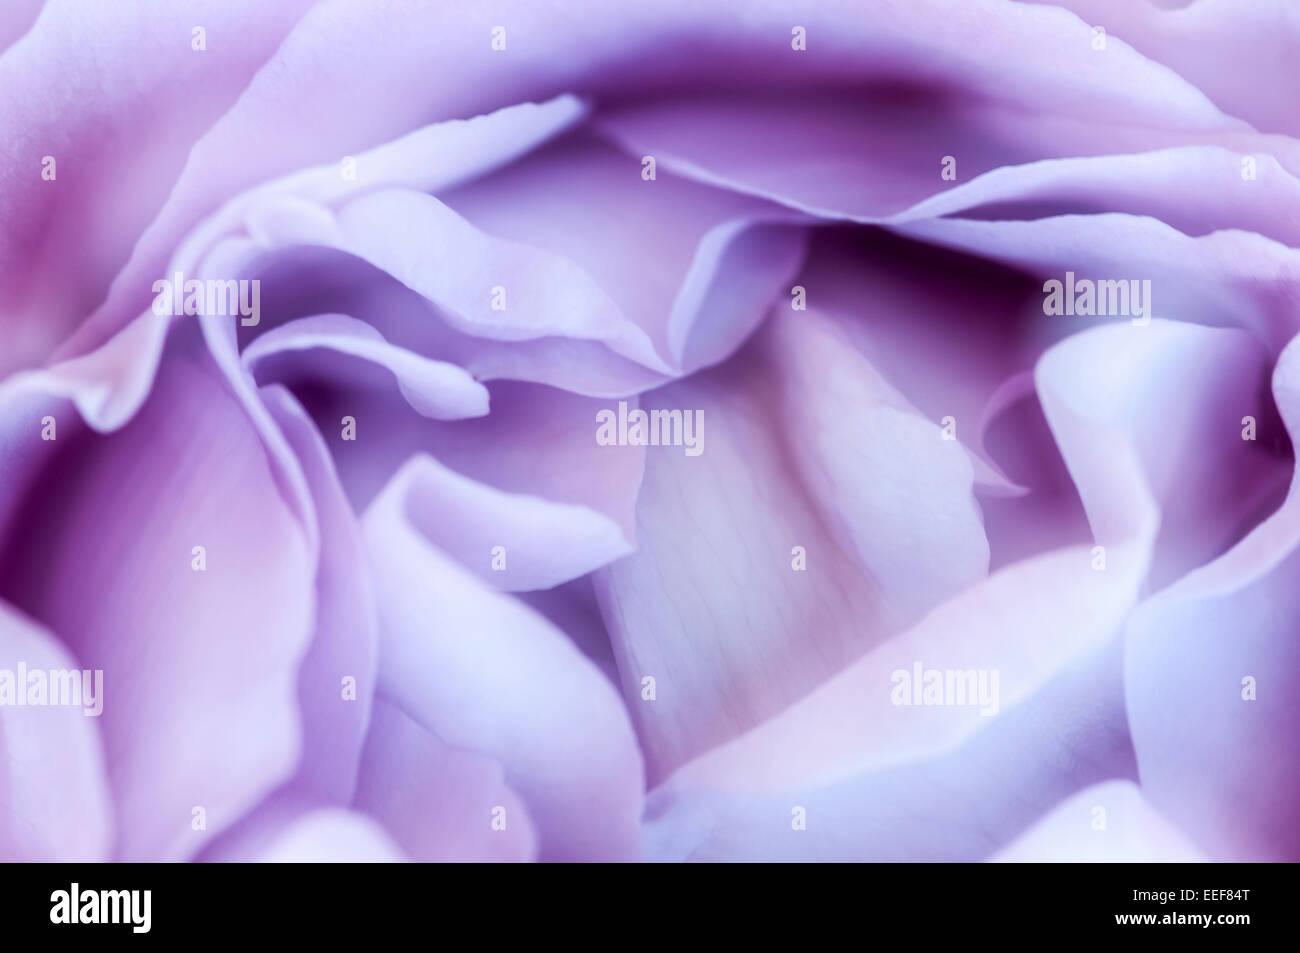 Close up image of rose petals. Abstract pattern useful for backgrounds, backdrops. A sense of purity, tranquility and beauty Stock Photo